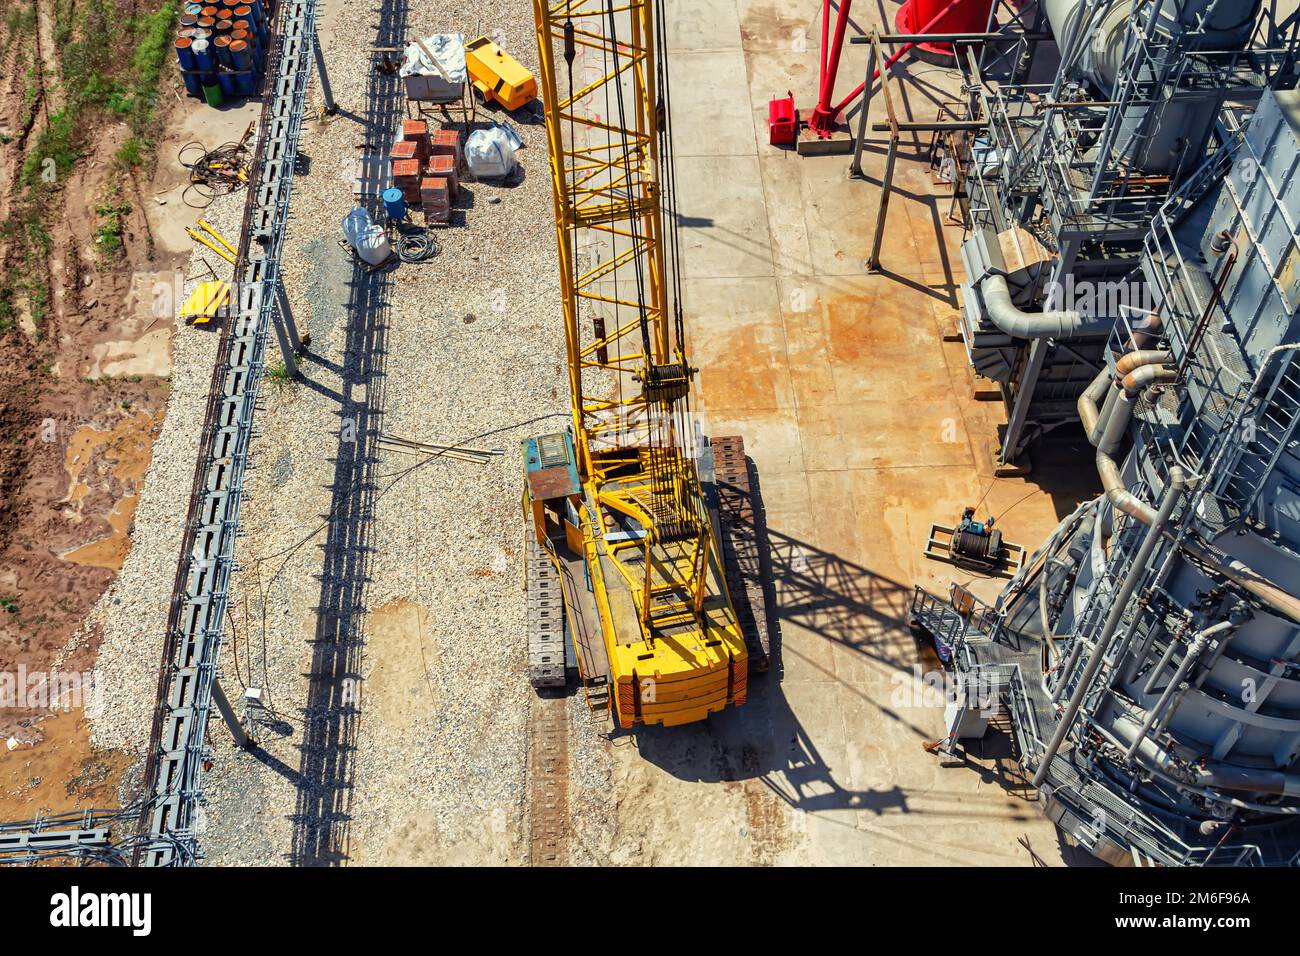 A large yellow crawler crane stands at the bottom of reactor Stock Photo